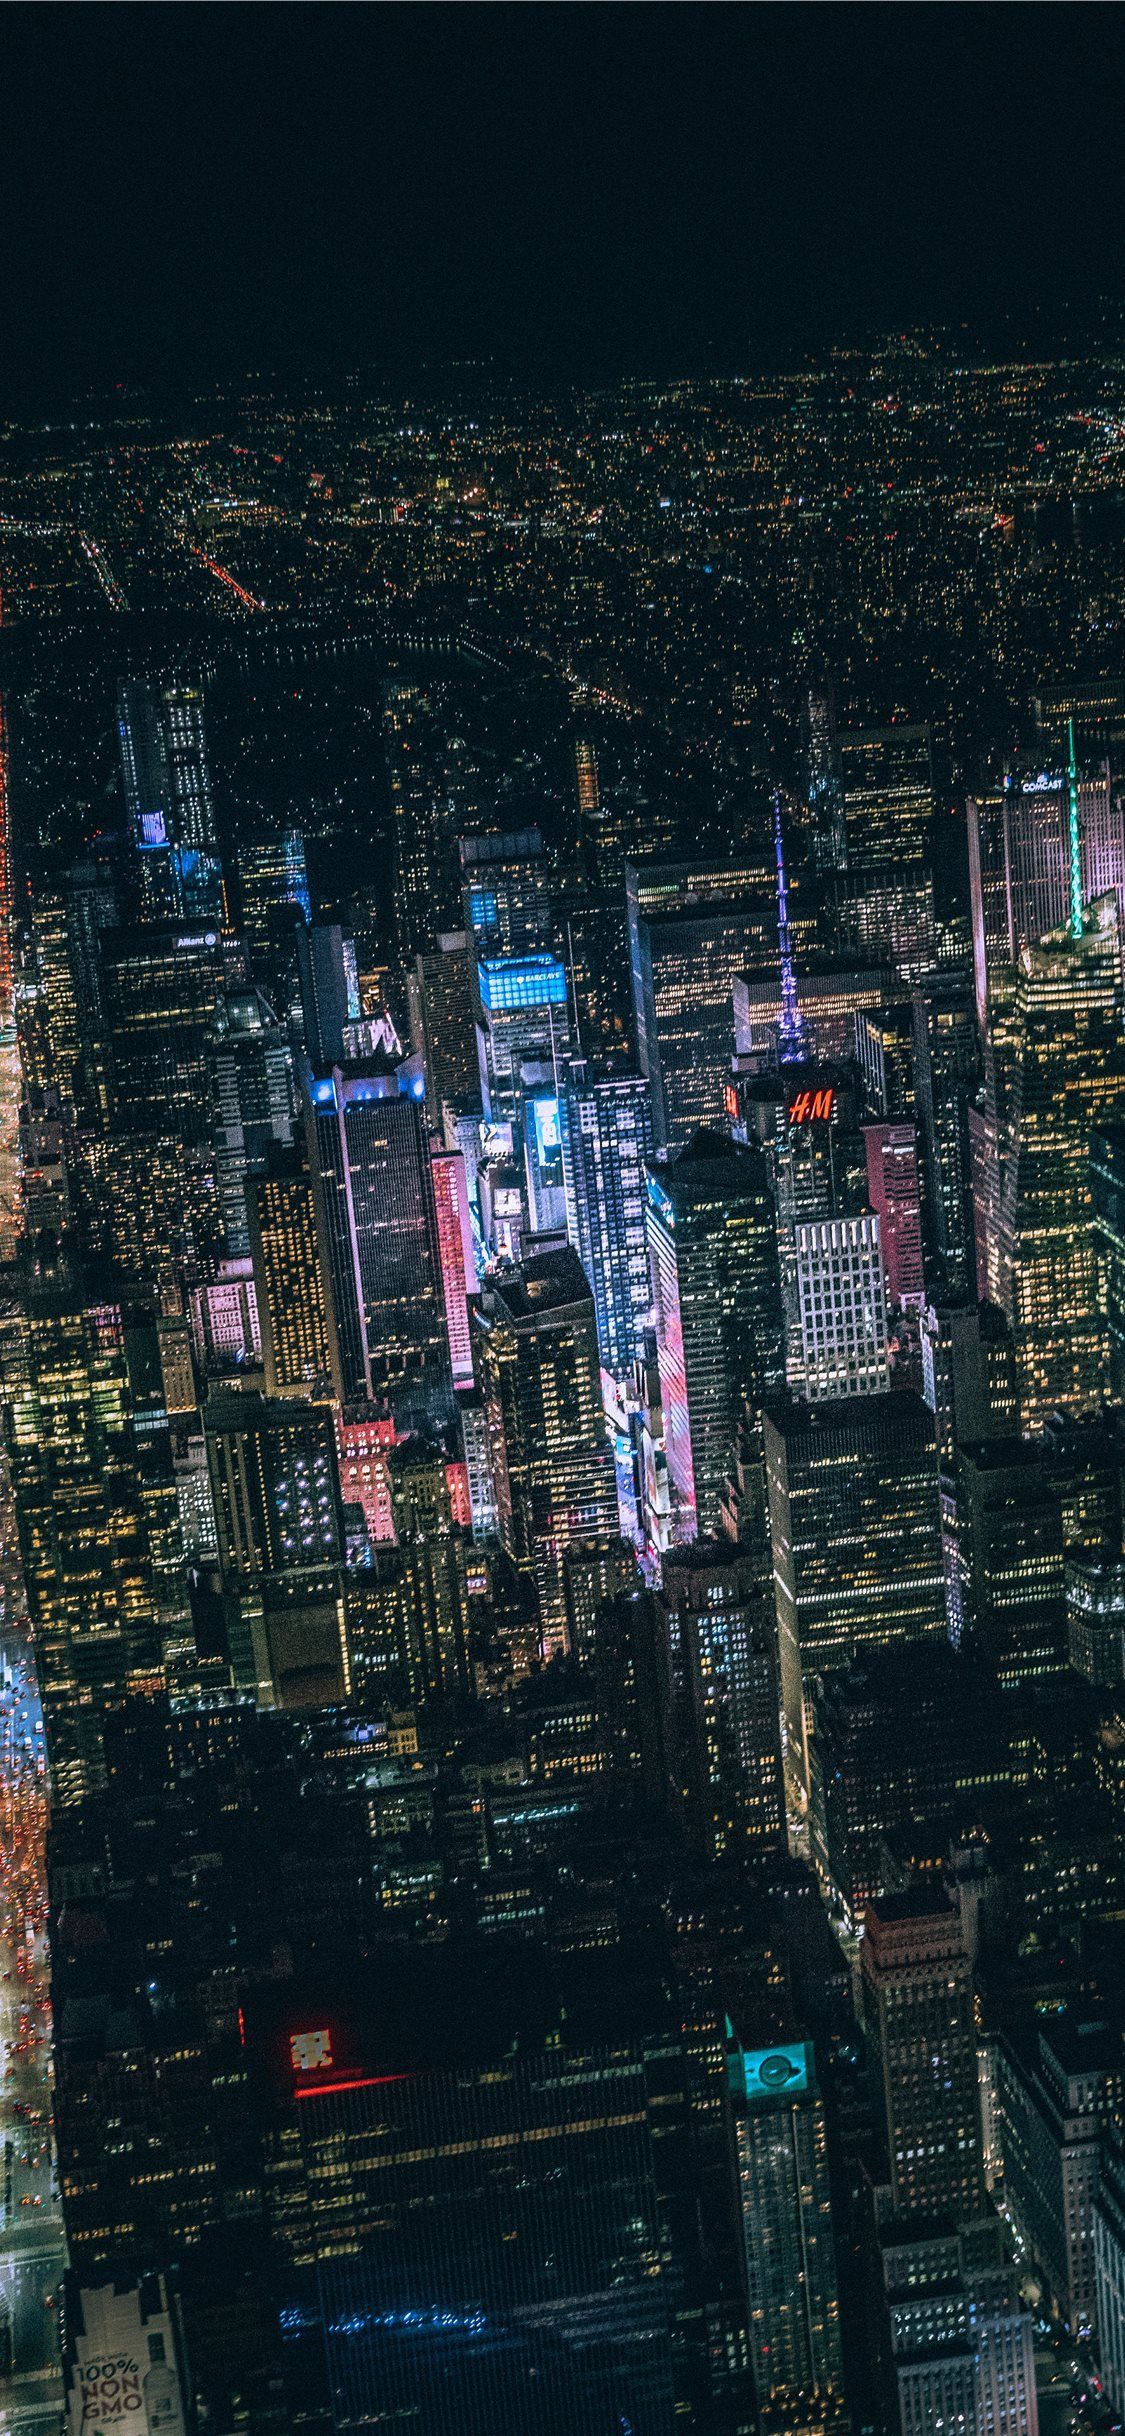 Aerial view of the city at night - City